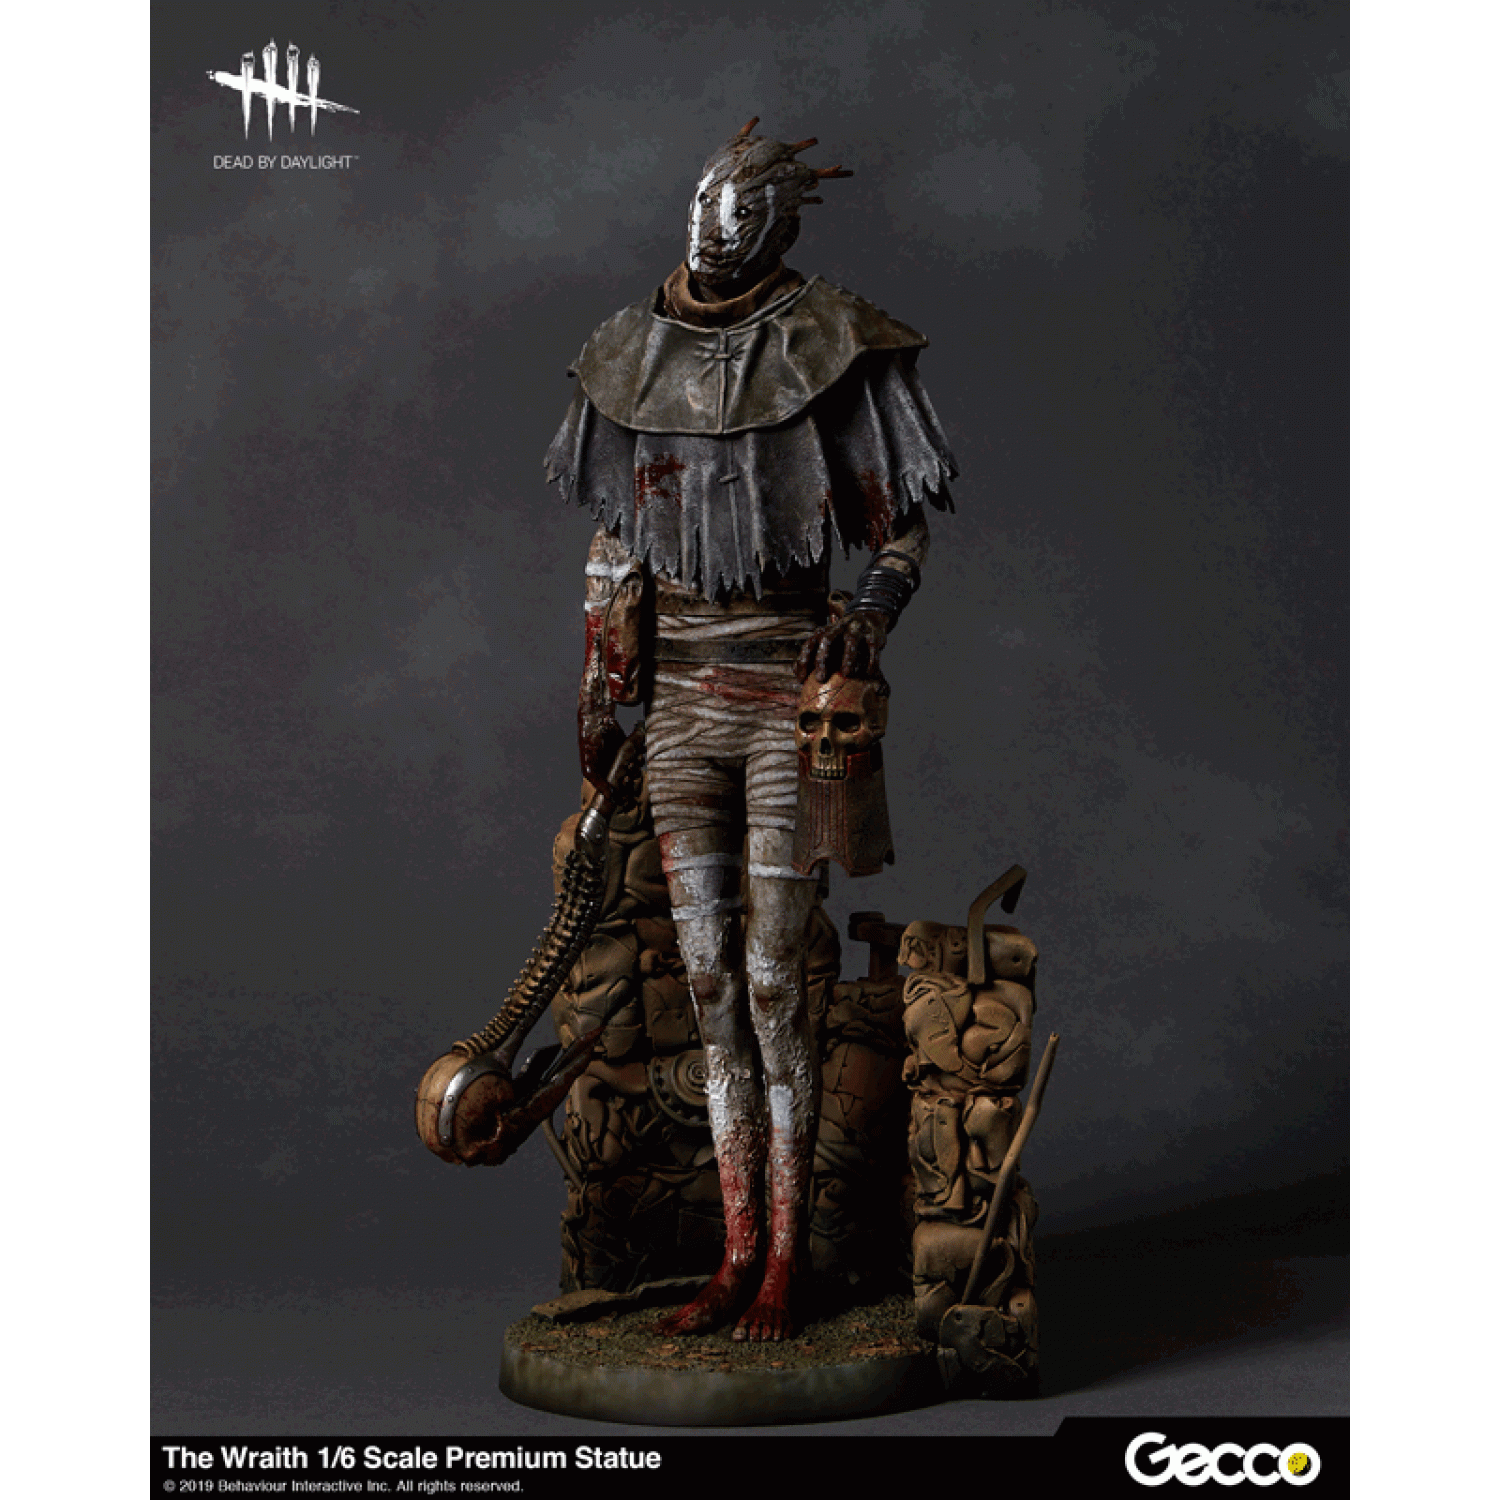 Dead by Daylight, The Wraith 1/6 Scale Premium Statue